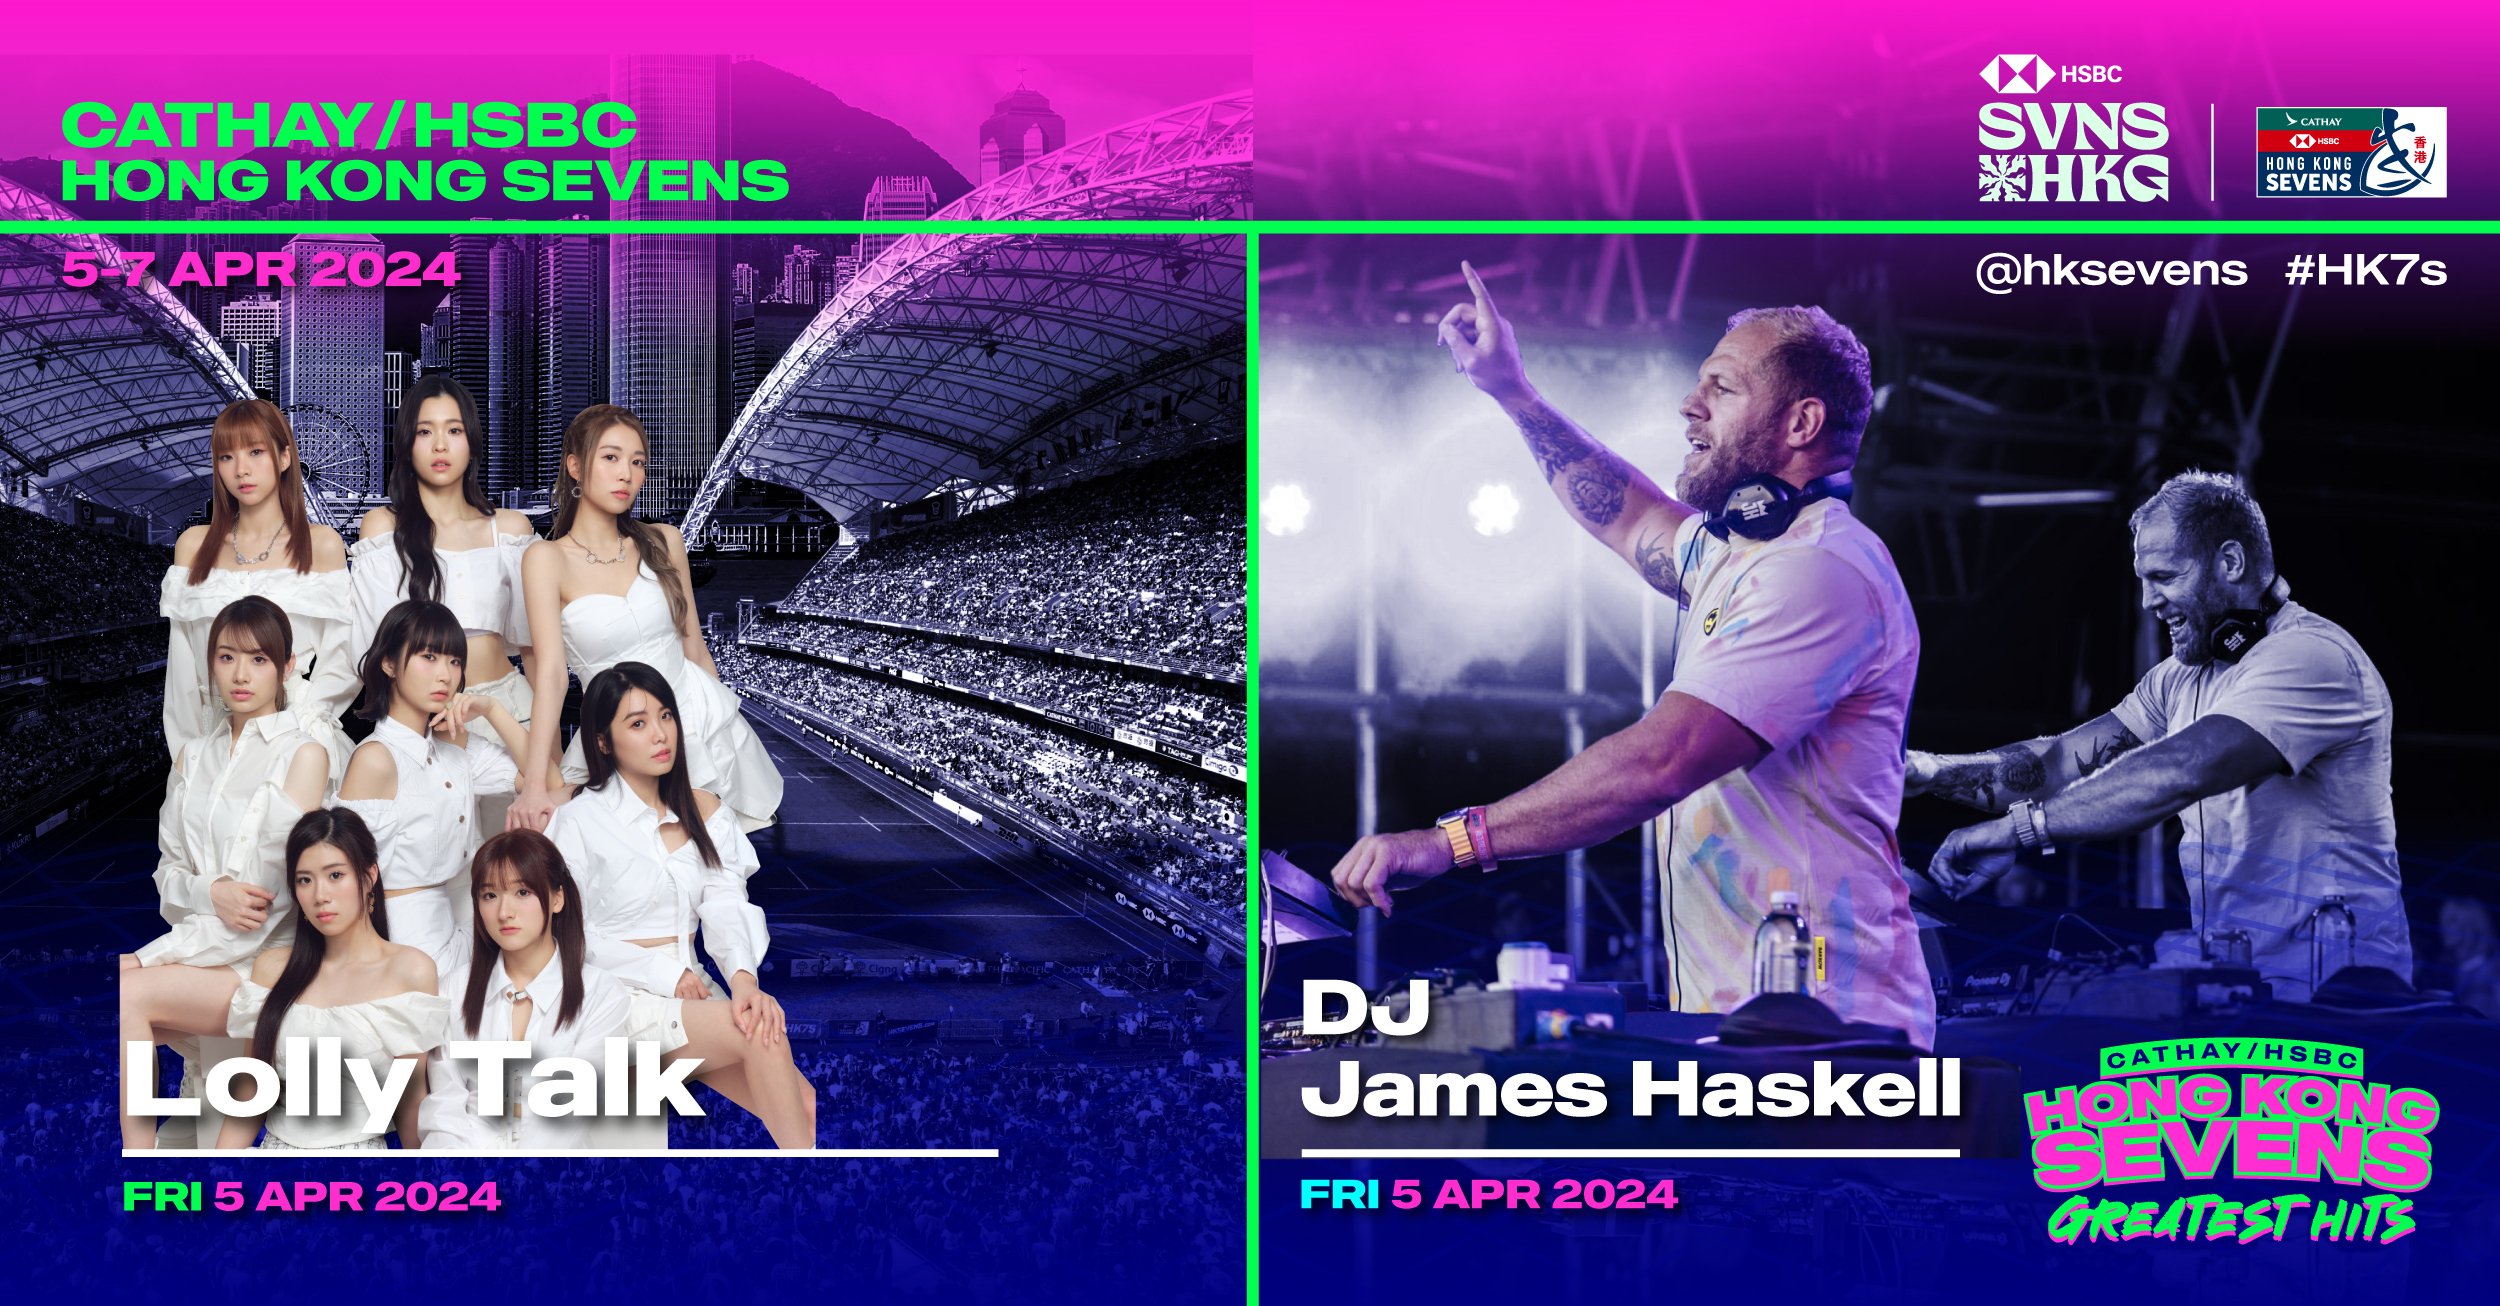 Cathay/HSBC Hong Kong Sevens 2024 serves up swansong for Hong Kong Stadium with The Wailers, Journey’s Arnel Pineda, Celine Tam, Cantopop sensations Lolly Talk and rugby star / DJ James Haskell